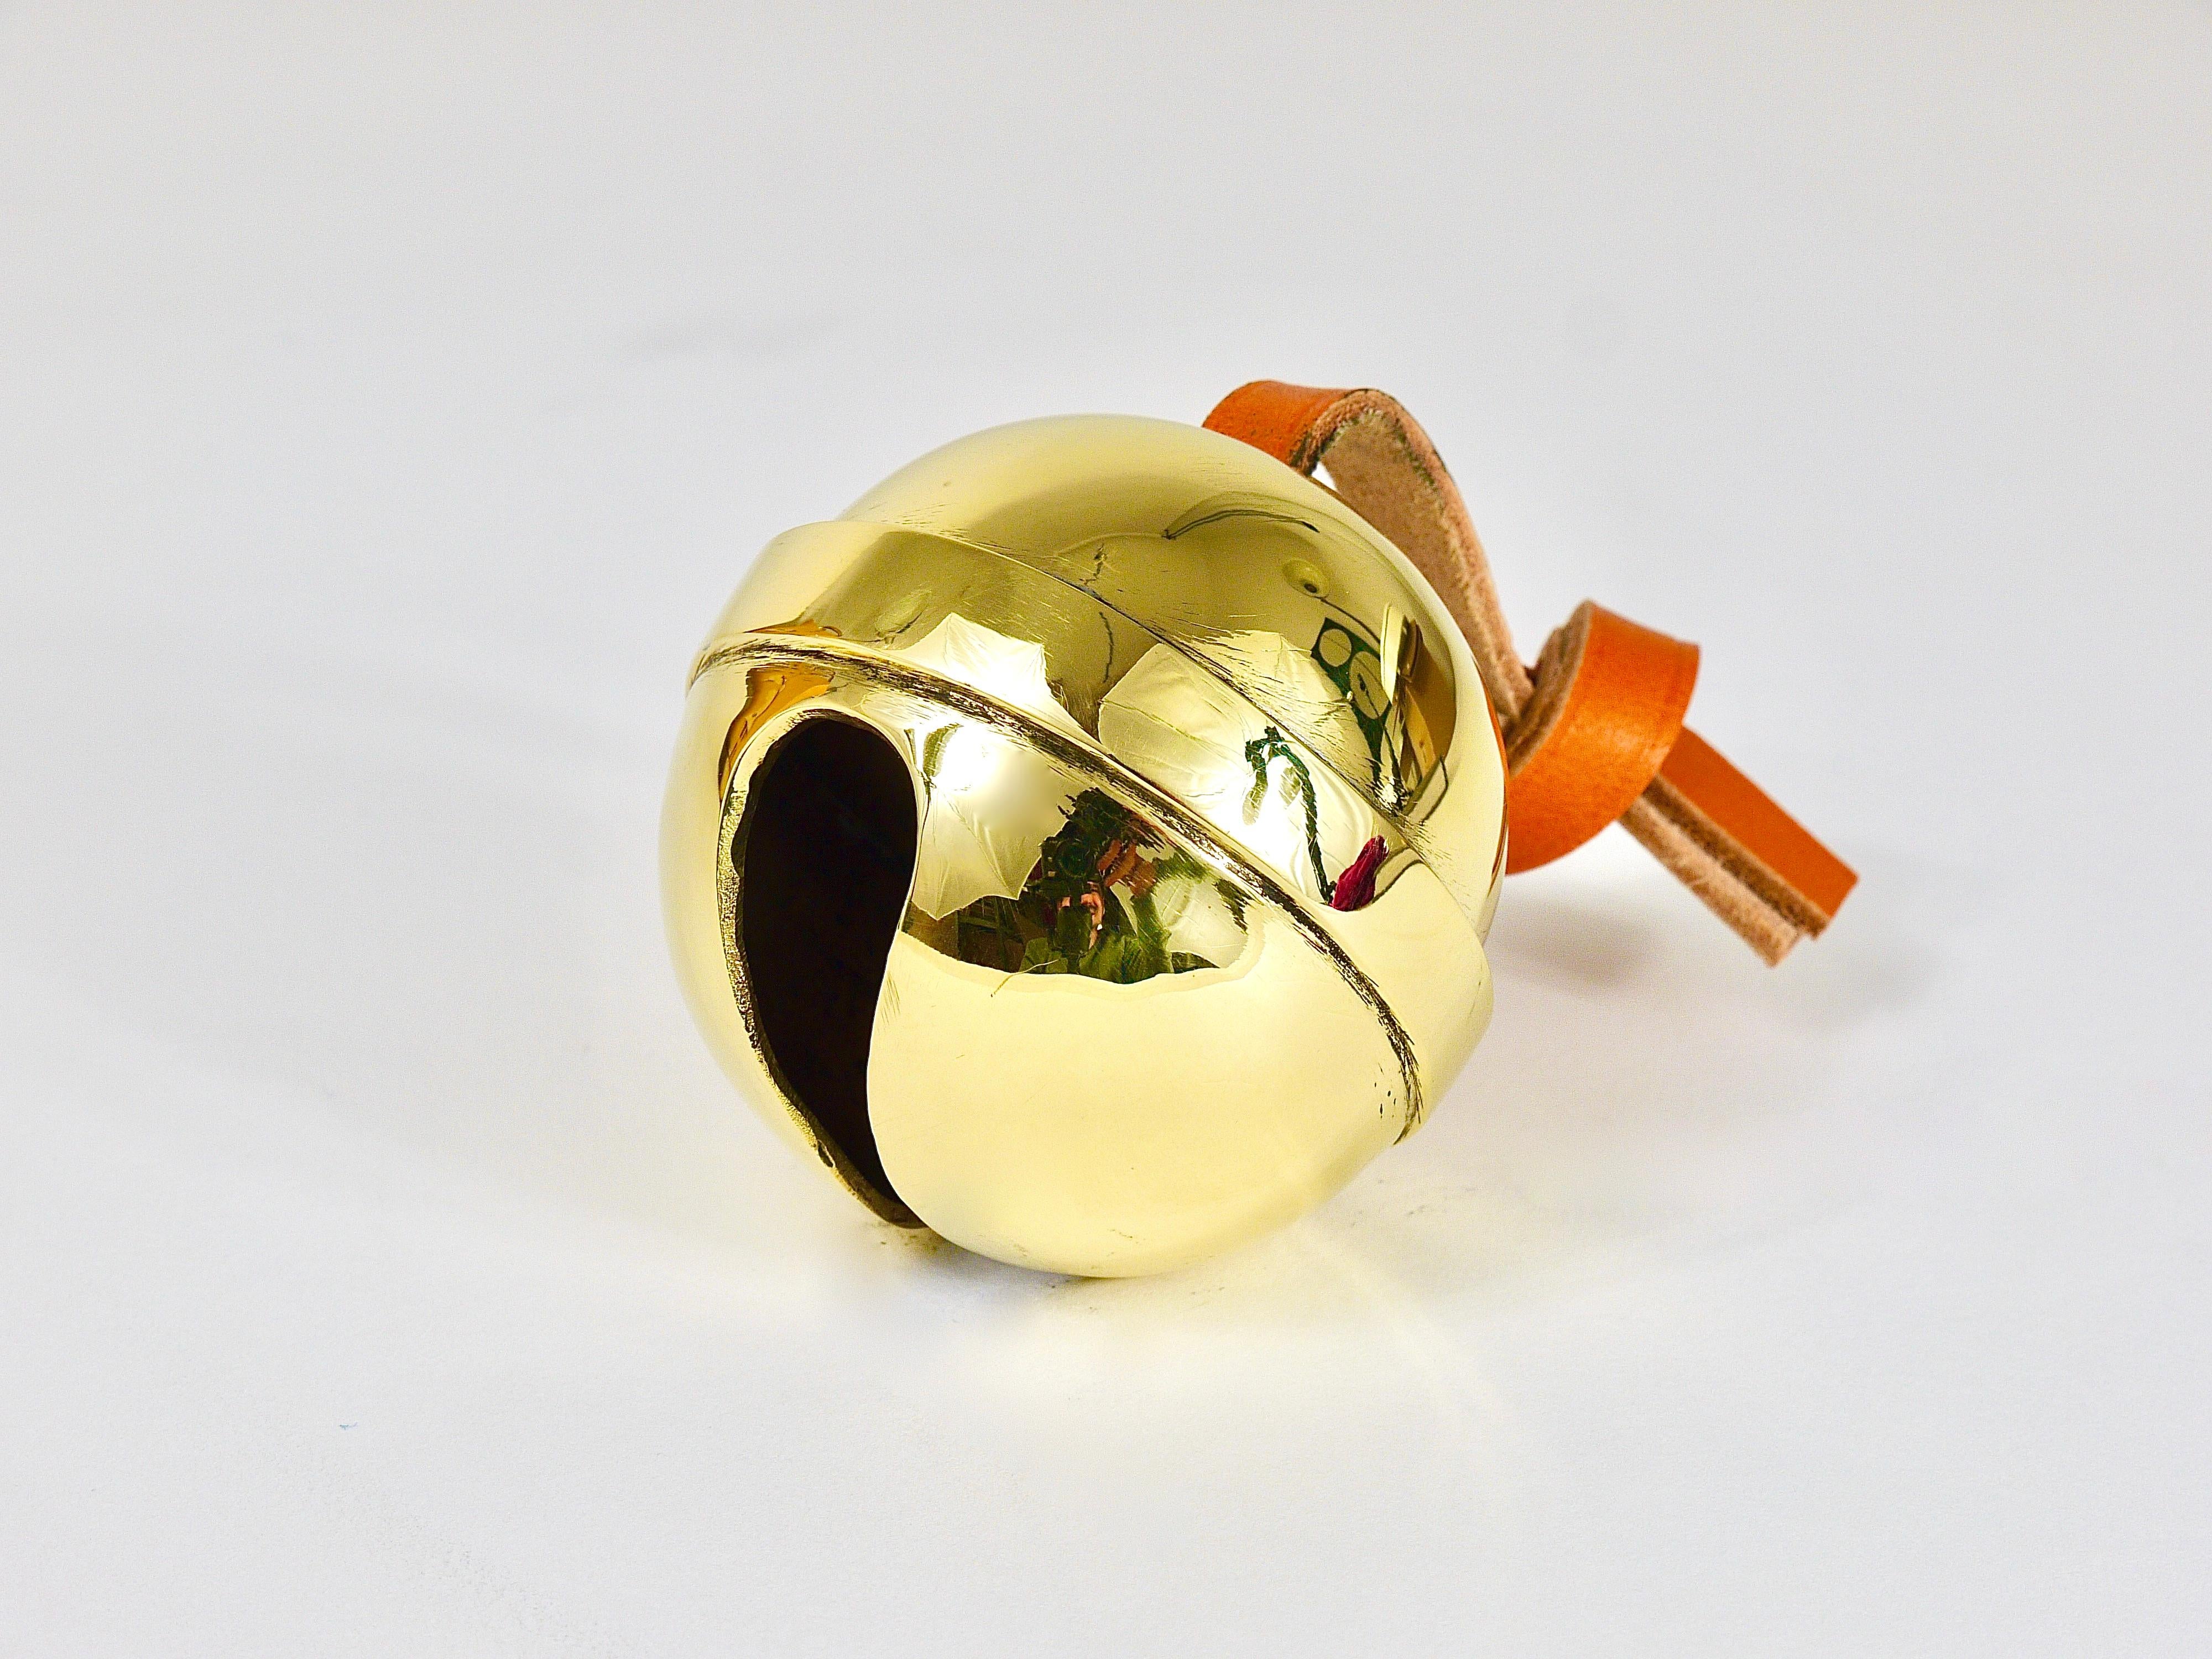 Carl Auböck Handcrafted Paperweight Jingle Bell #5039, Brass, Leather, Austria For Sale 7